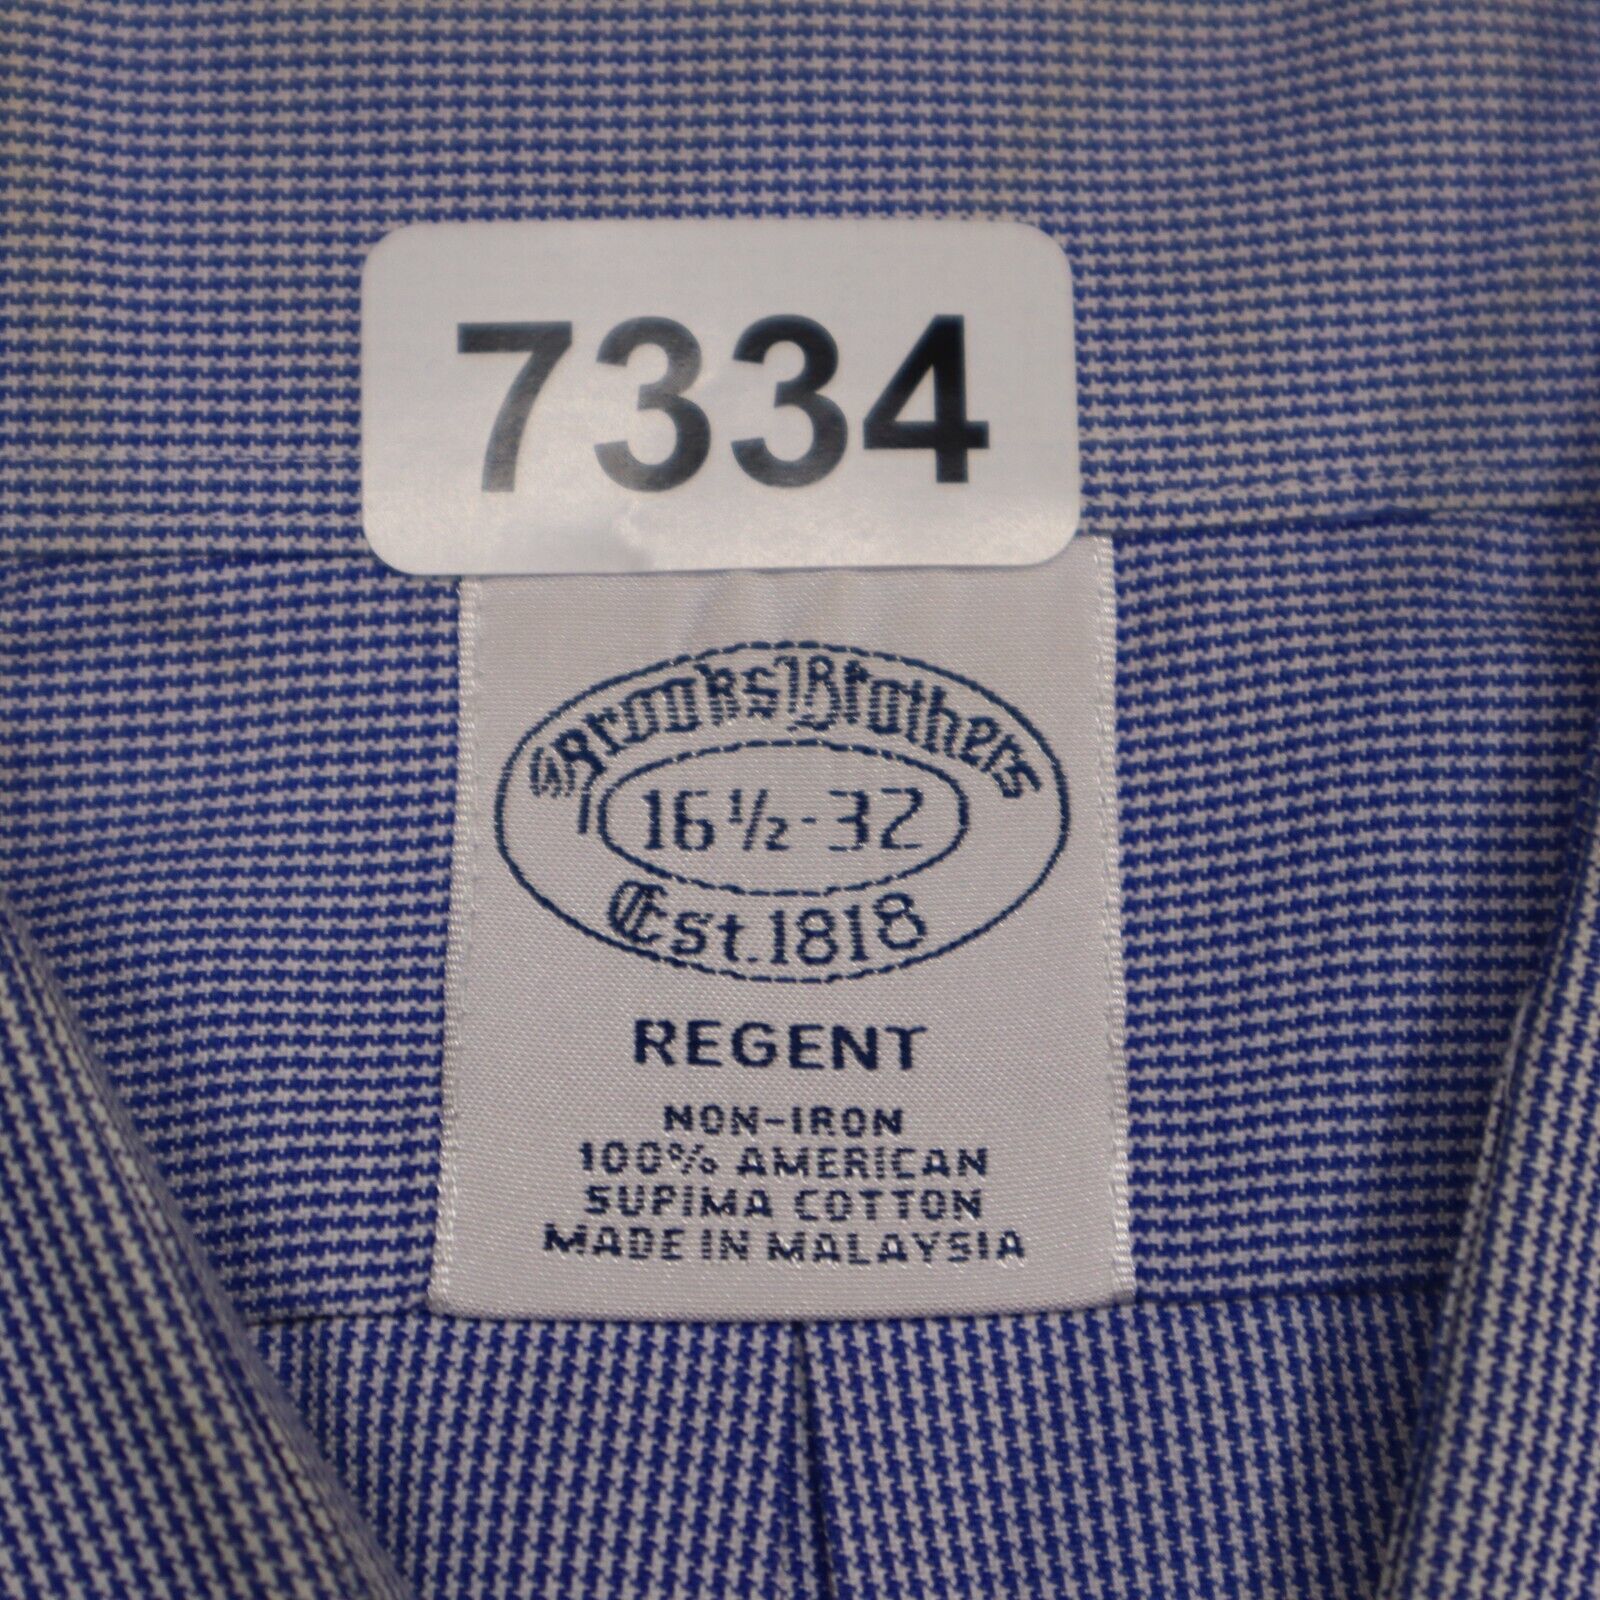 Primary image for Brooks Brothers Regent Shirt 16 1/2 - 32 Blue Long Sleeve Button Up Casual Men